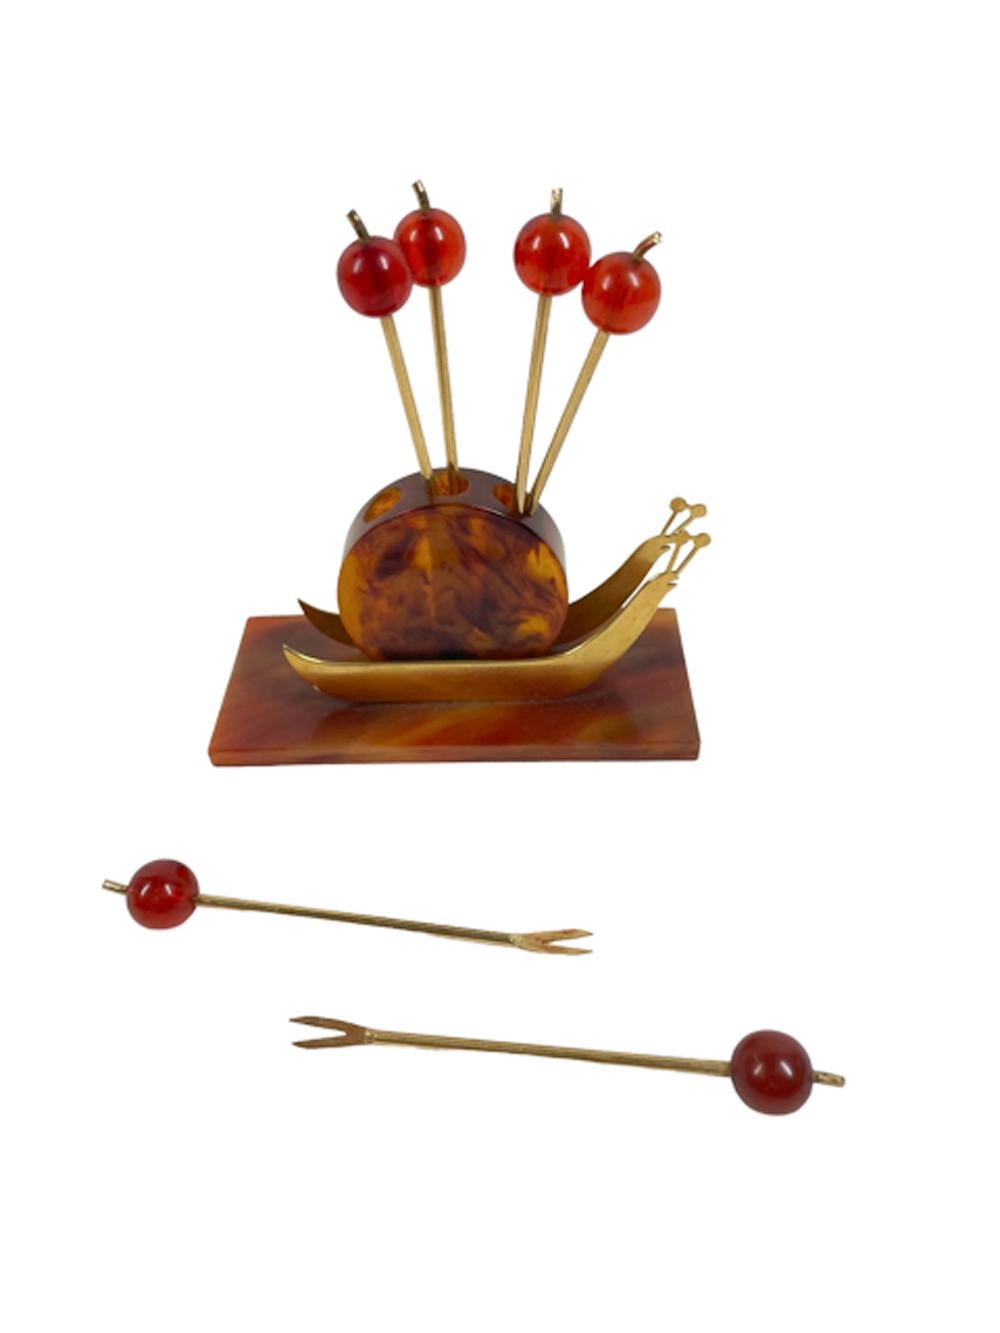 Art Deco cocktail pick set with six gold toned picks with forked tips and translucent red berry tops in a snail-form stand of faux tortoiseshell Bakelite and gild toned metal.